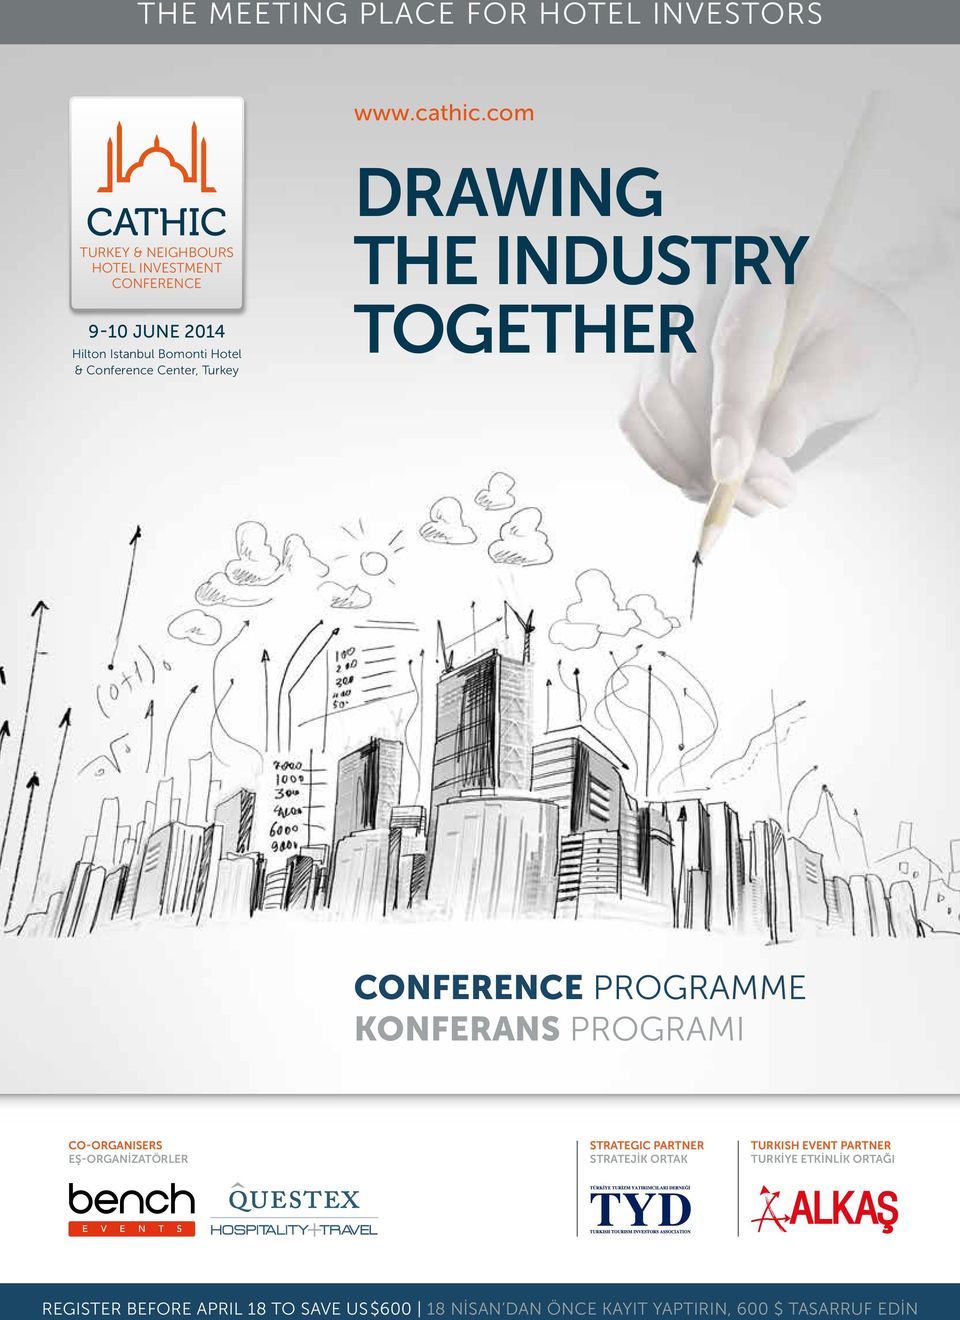 Conference Center, Turkey DRAWING THE INDUSTRY TOGETHER CONFERENCE PROGRAMME KONFERANS PROGRAMI CO-ORGANISERS